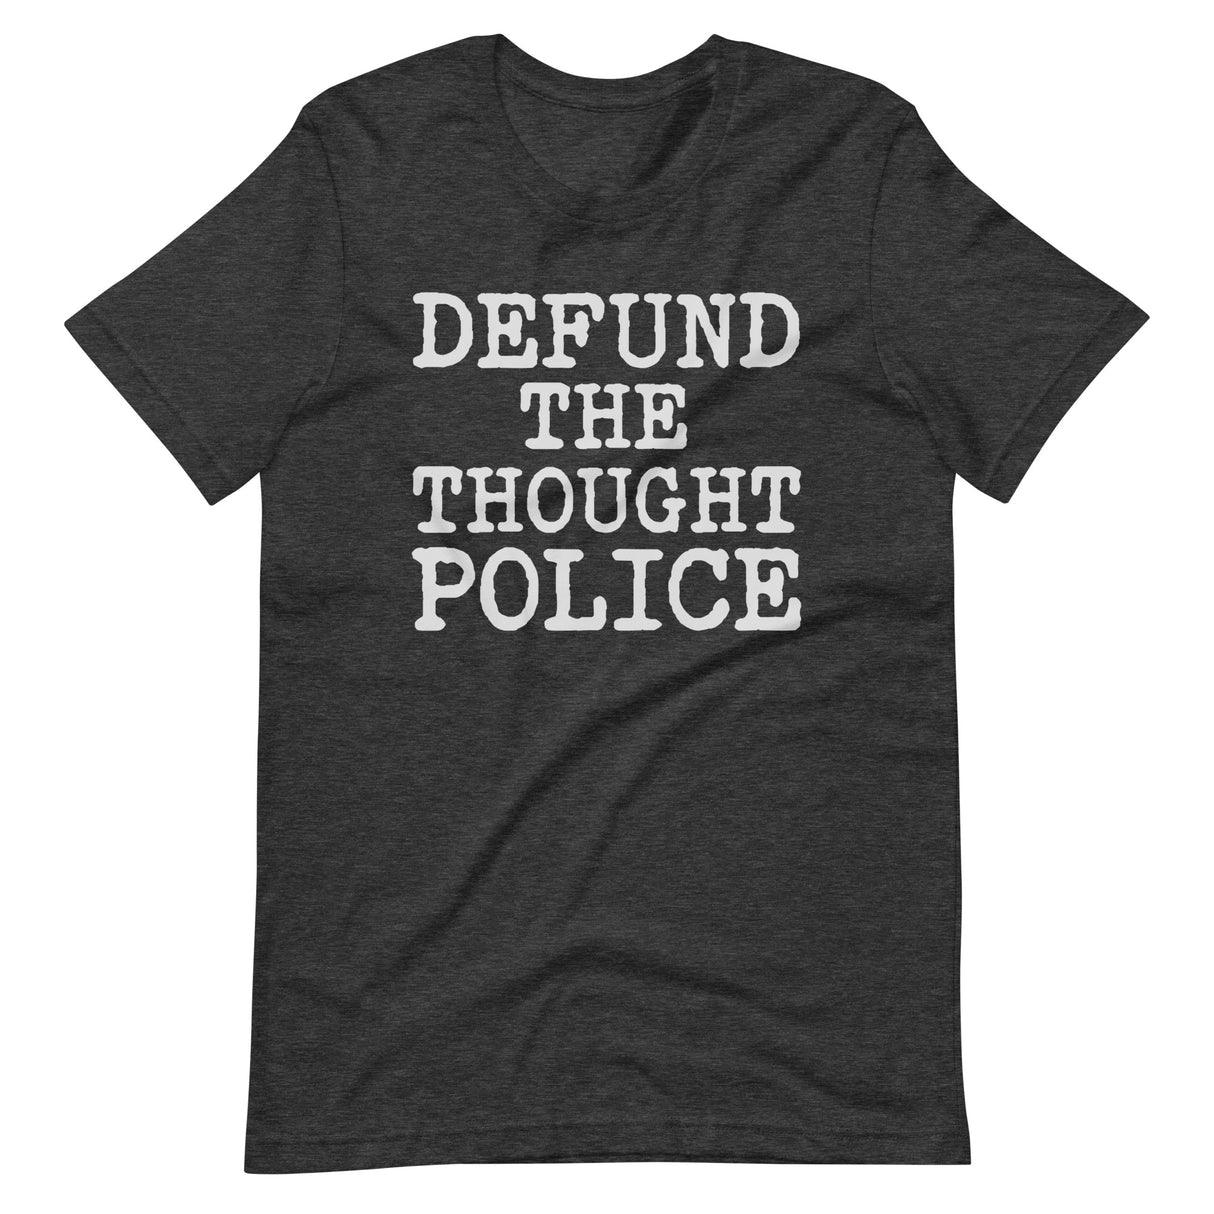 Defund The Thought Police Shirt by Libertarian Country